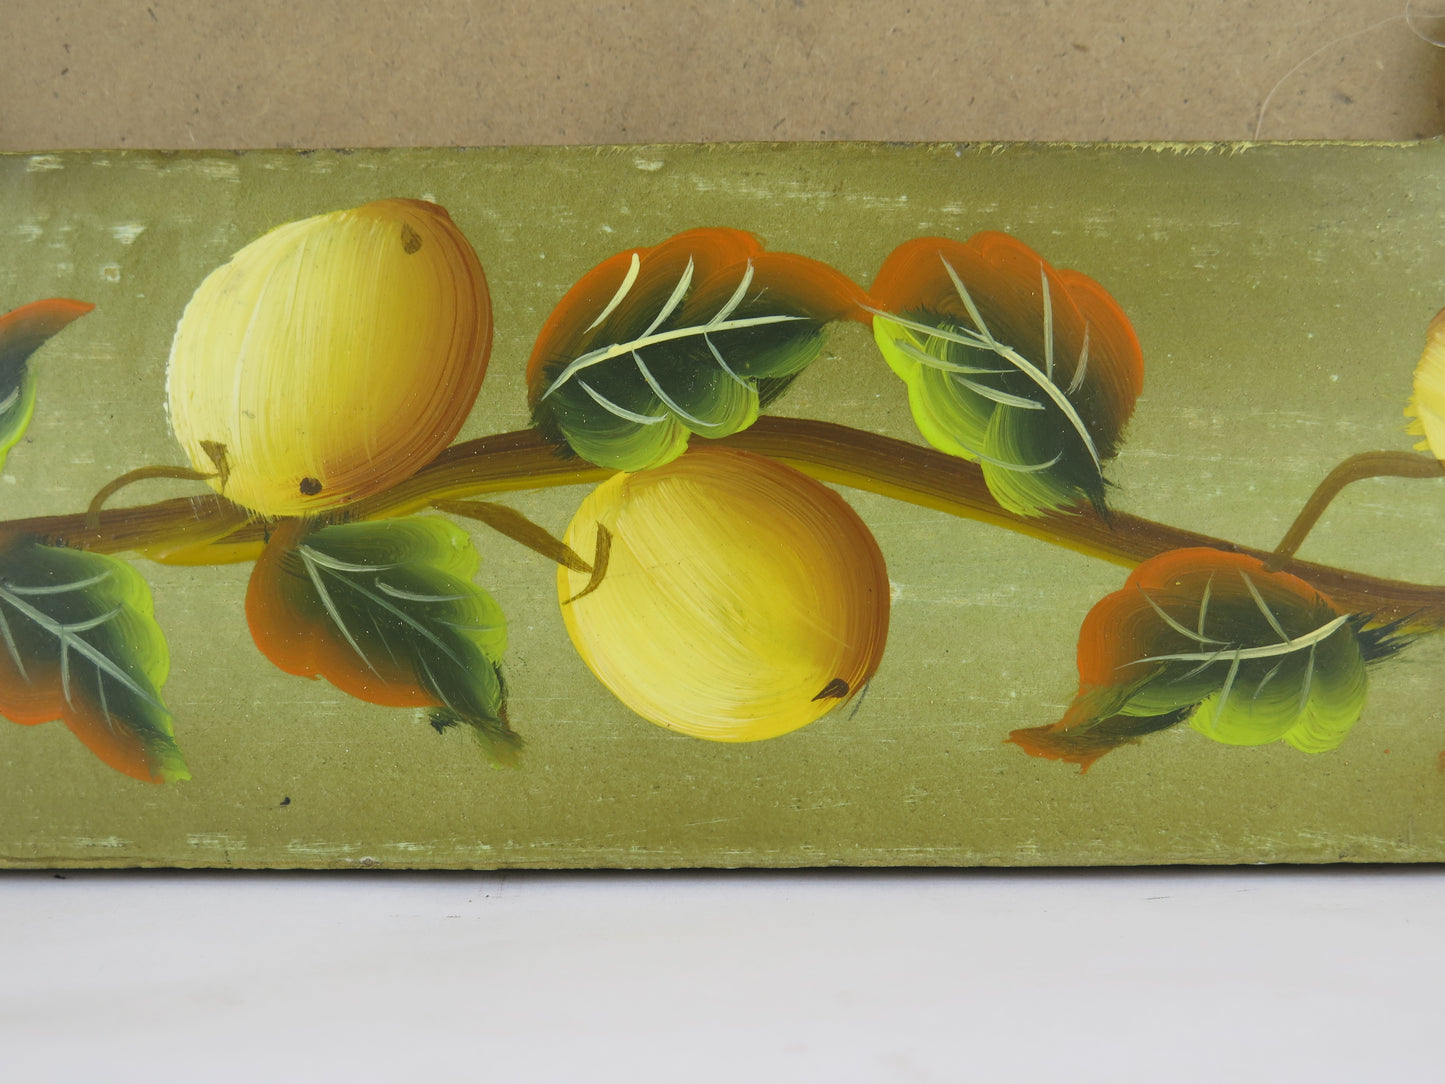 23x33 cm FRAME FOR VINTAGE PAINTINGS IN WOOD PAINTED WITH VEGETABLE PATTERNS BA.COR